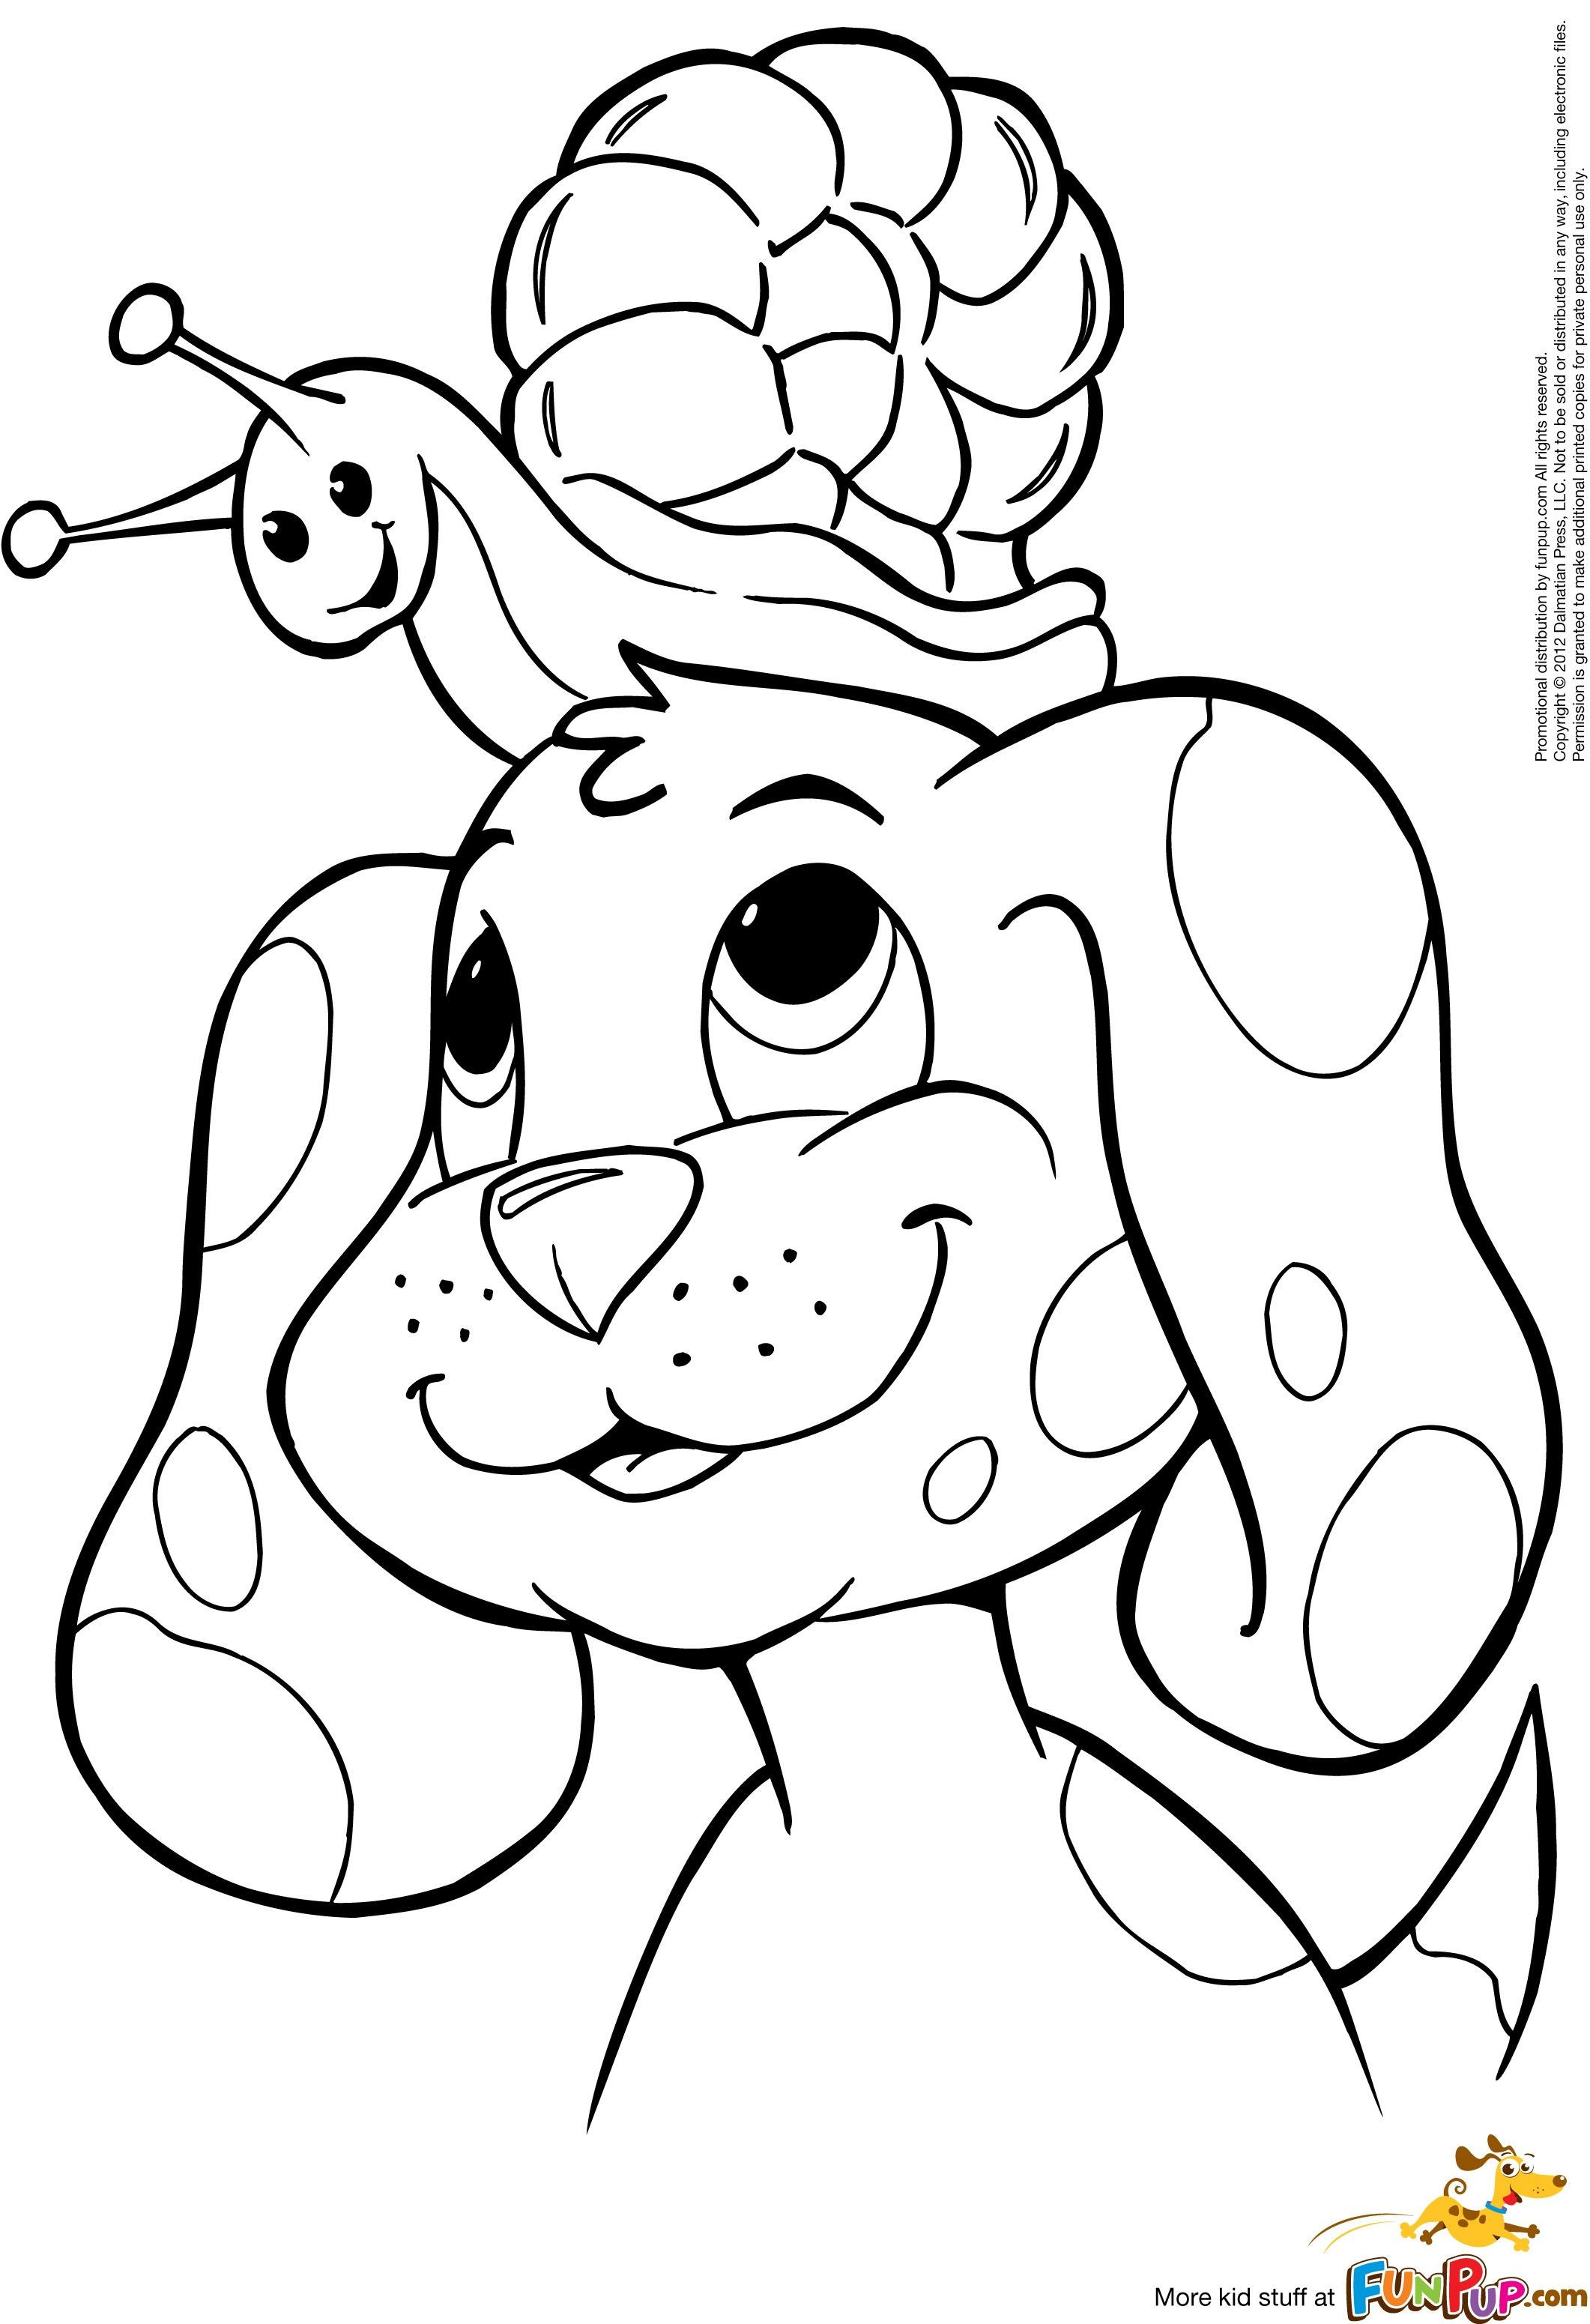 Coloring Pages For Kids Dog
 Puppy 1 0 colouring pages